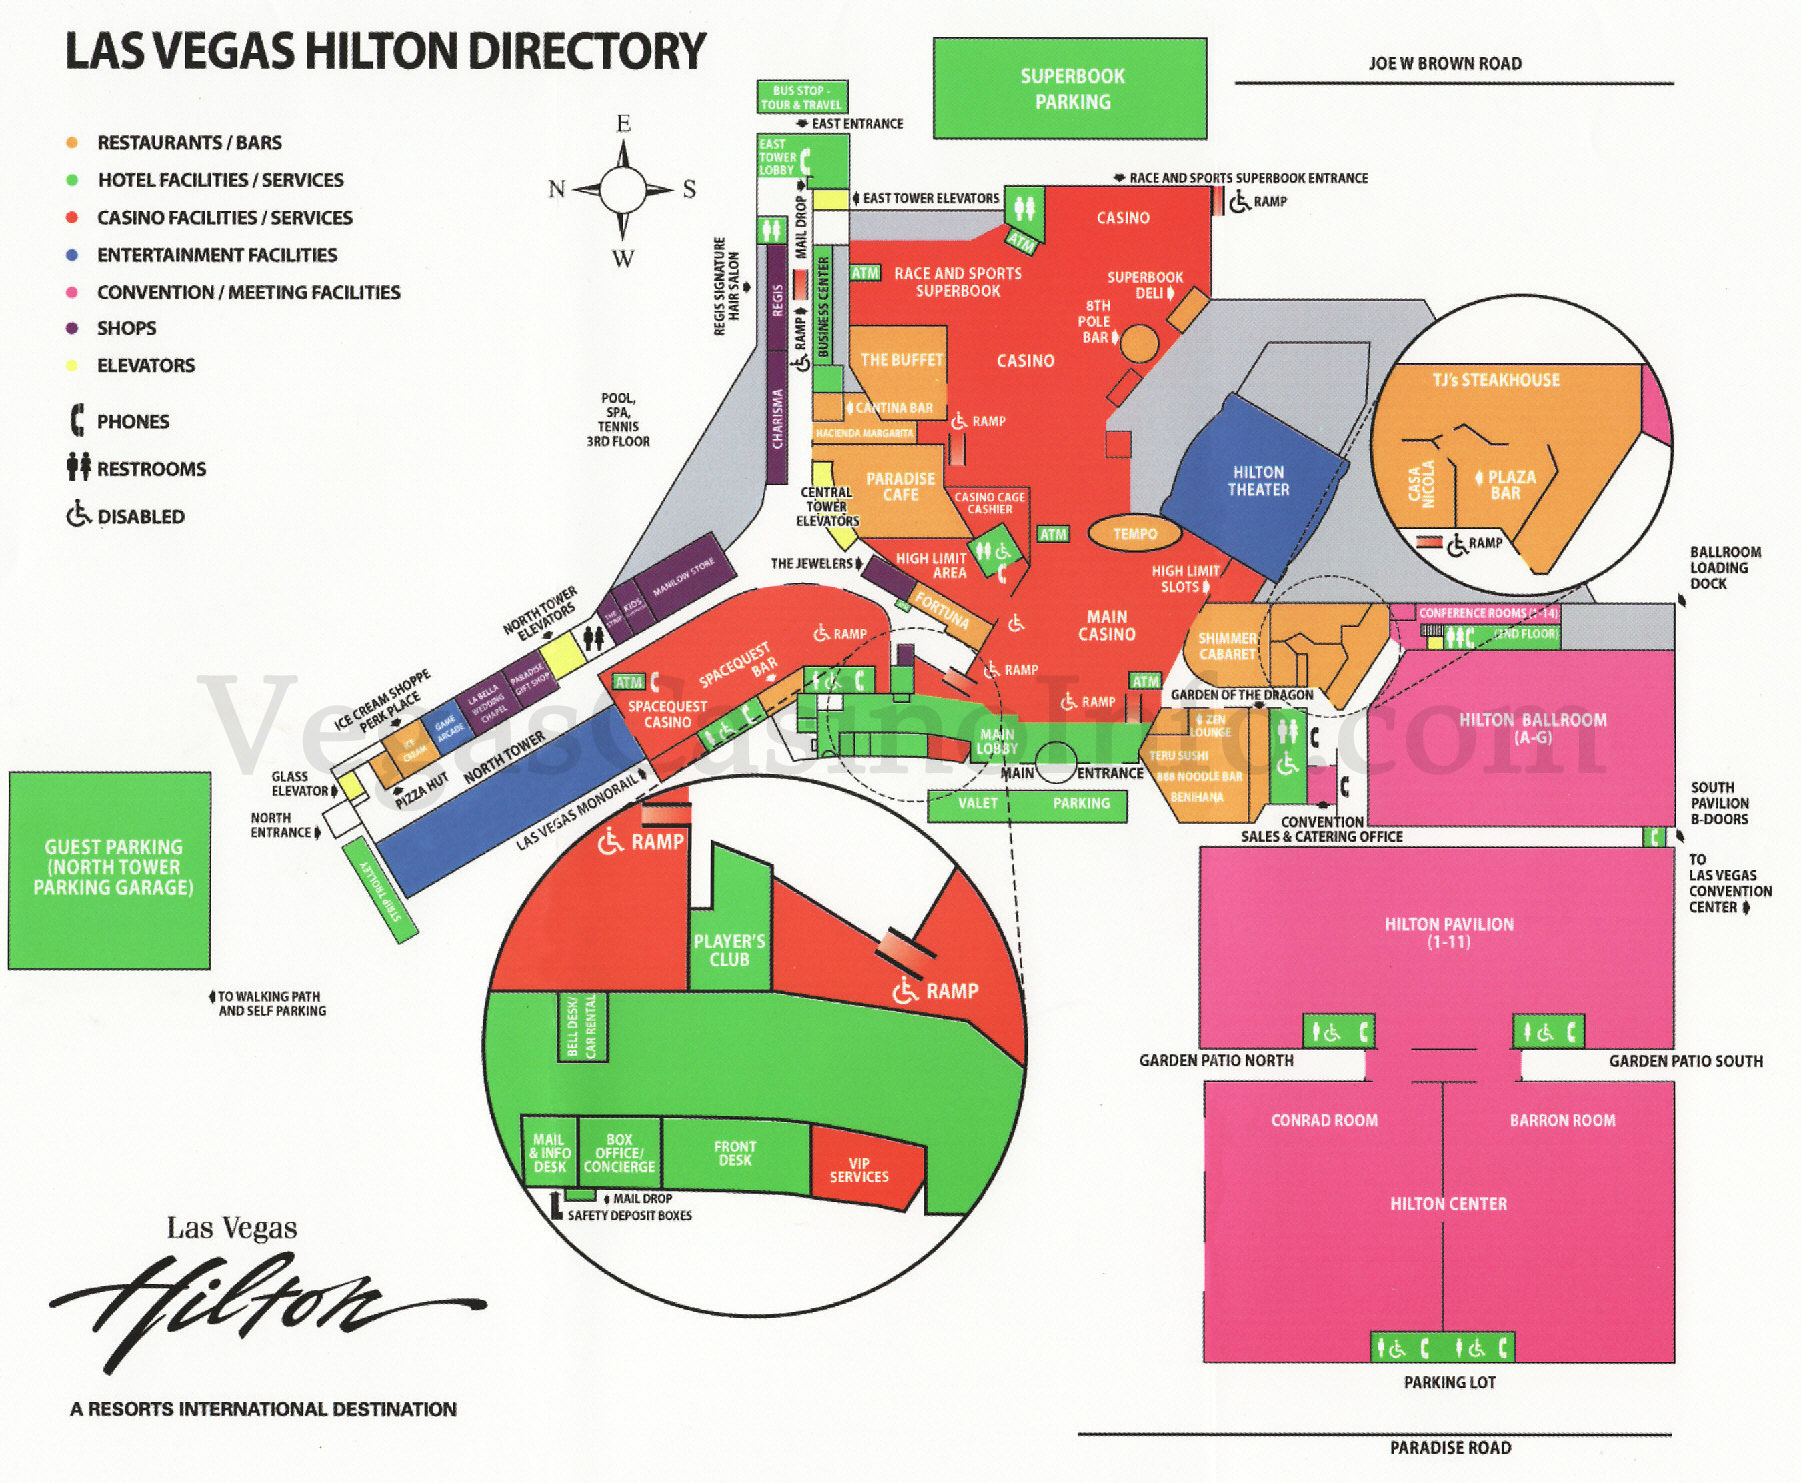 Las Vegas Casino Property Maps And Floor Plans | Vegascasinoinfo - Casinos In Texas Map